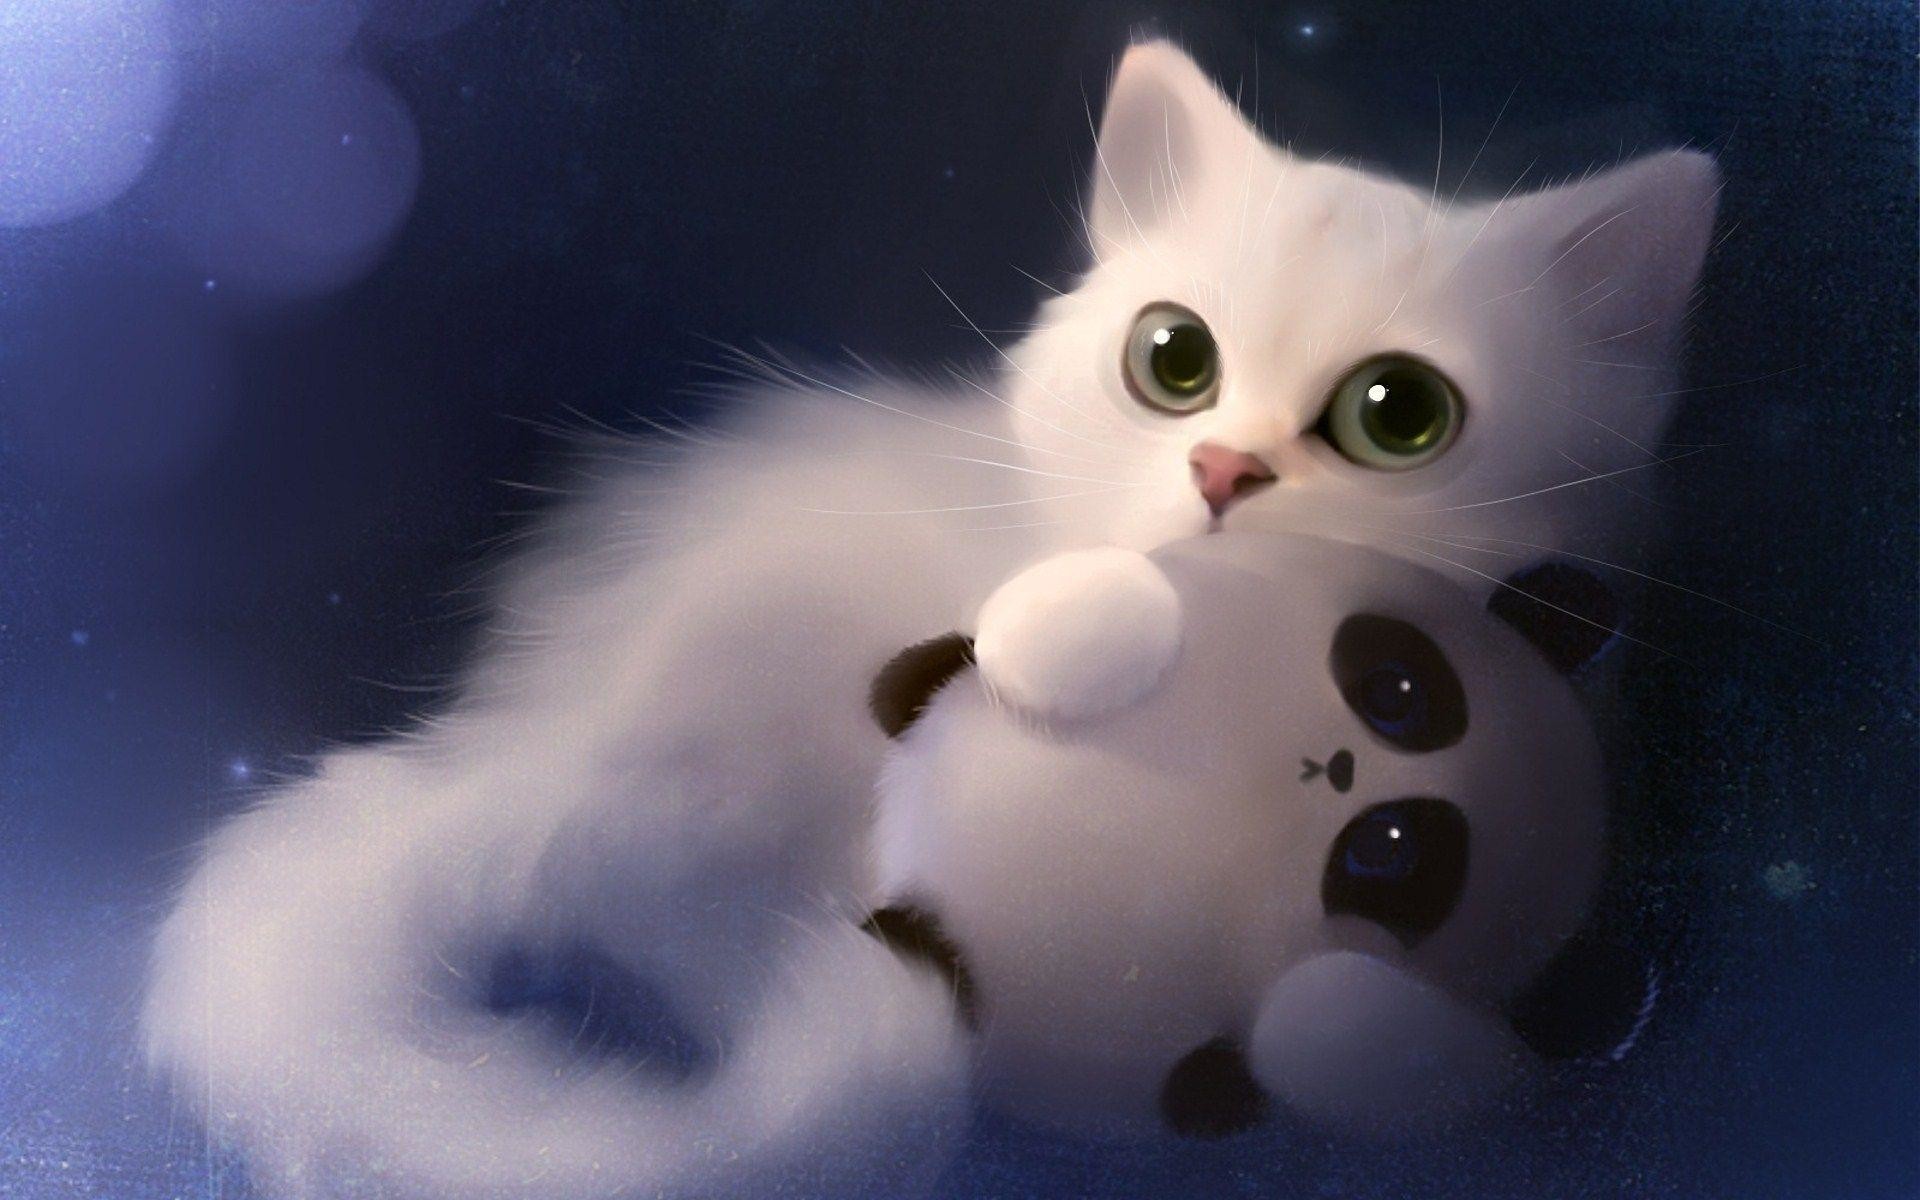 Cutest Wallpapers Ever (56+ images)